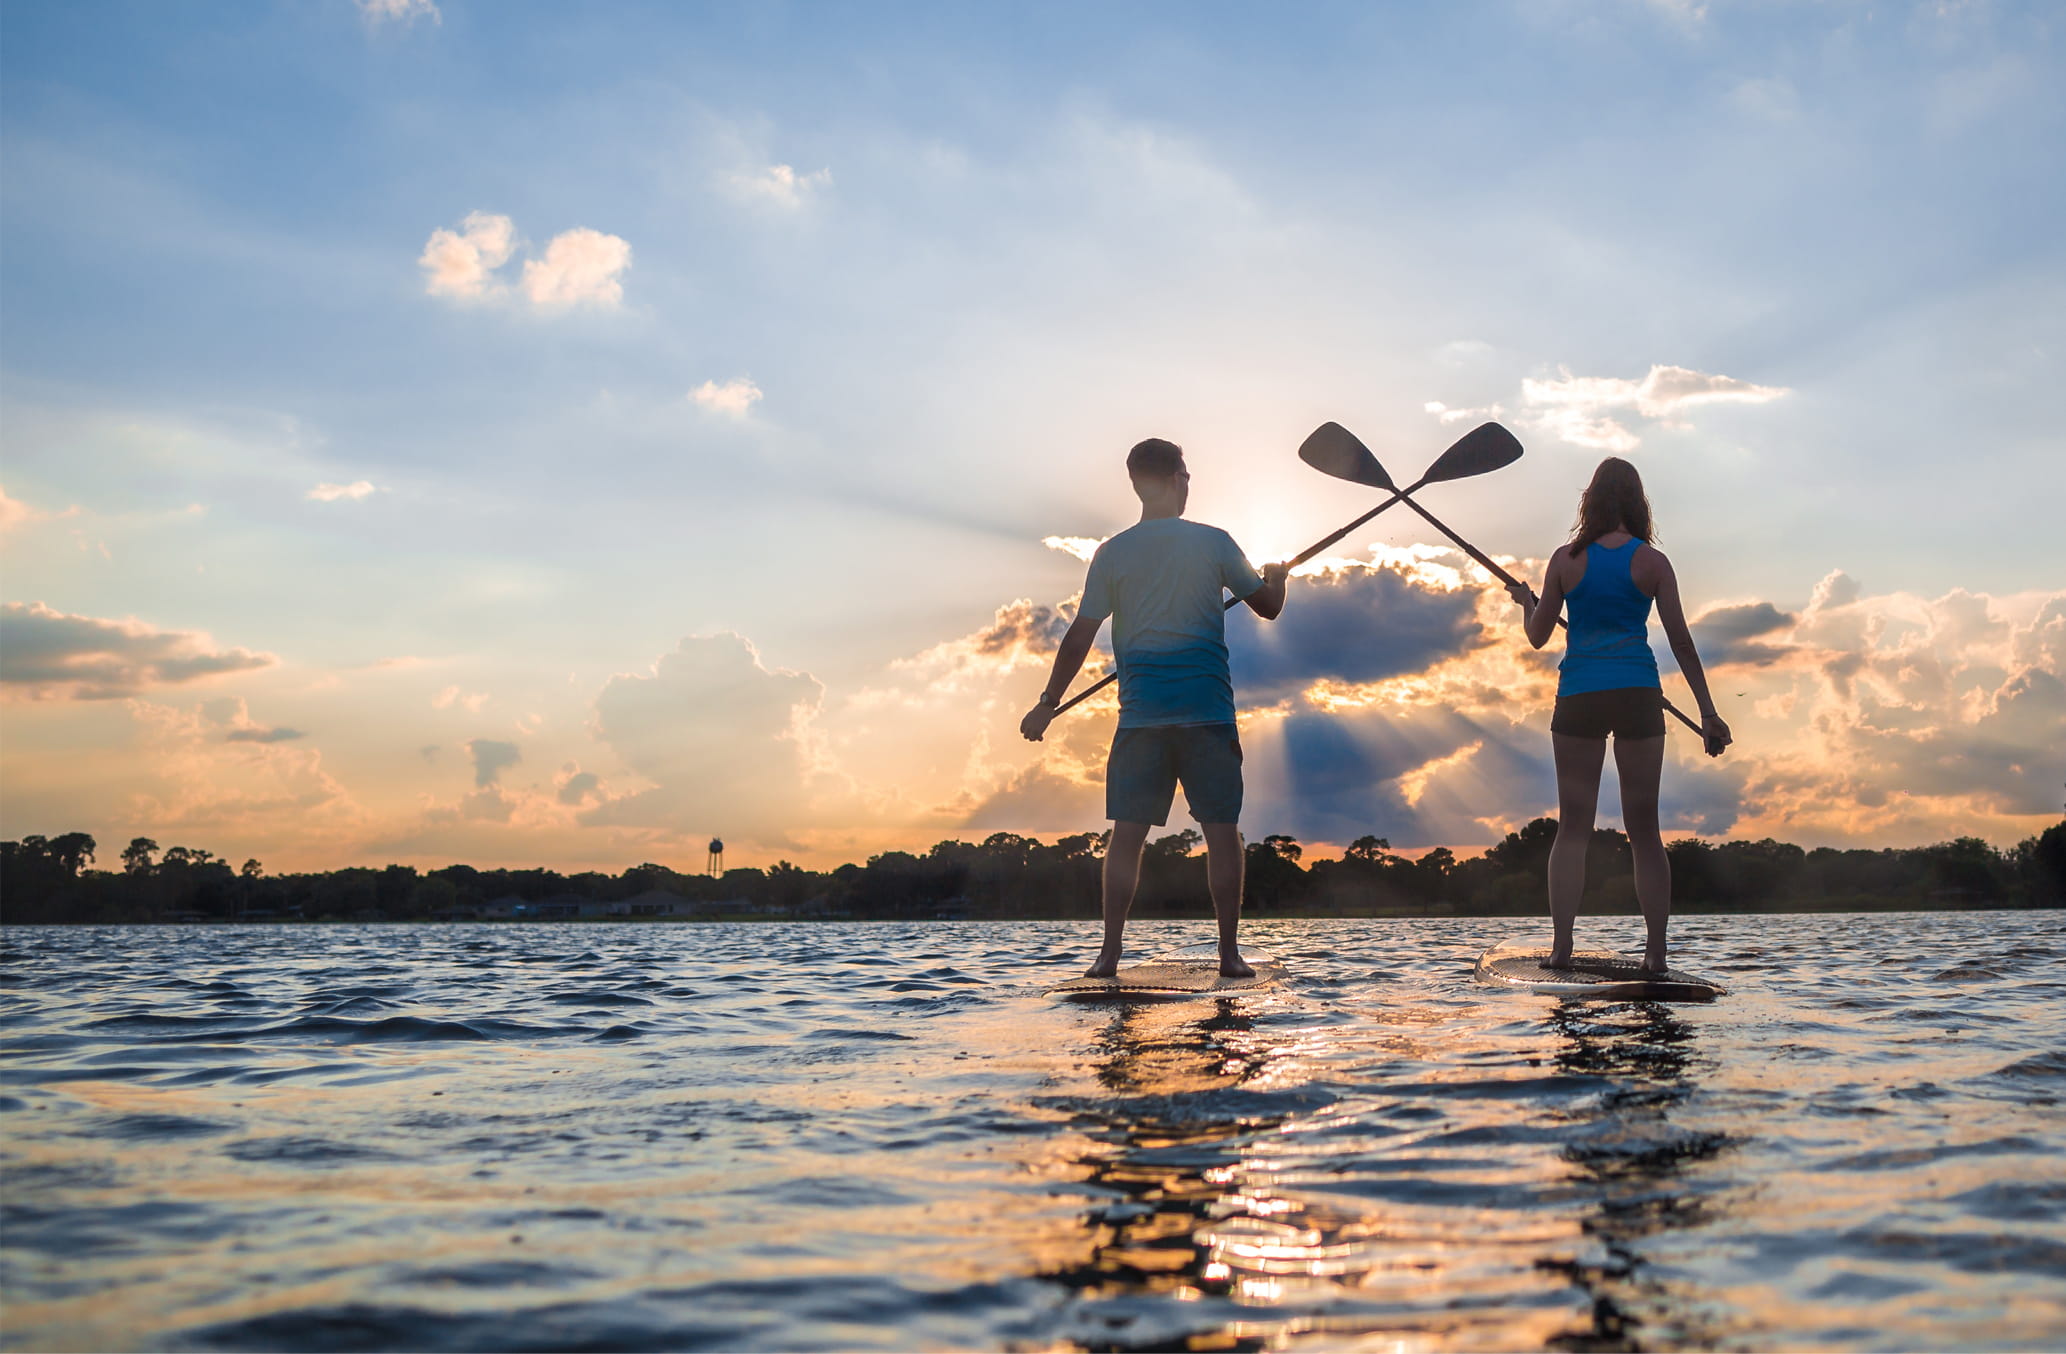 Central Florida vacations - Things to do in Central Florida